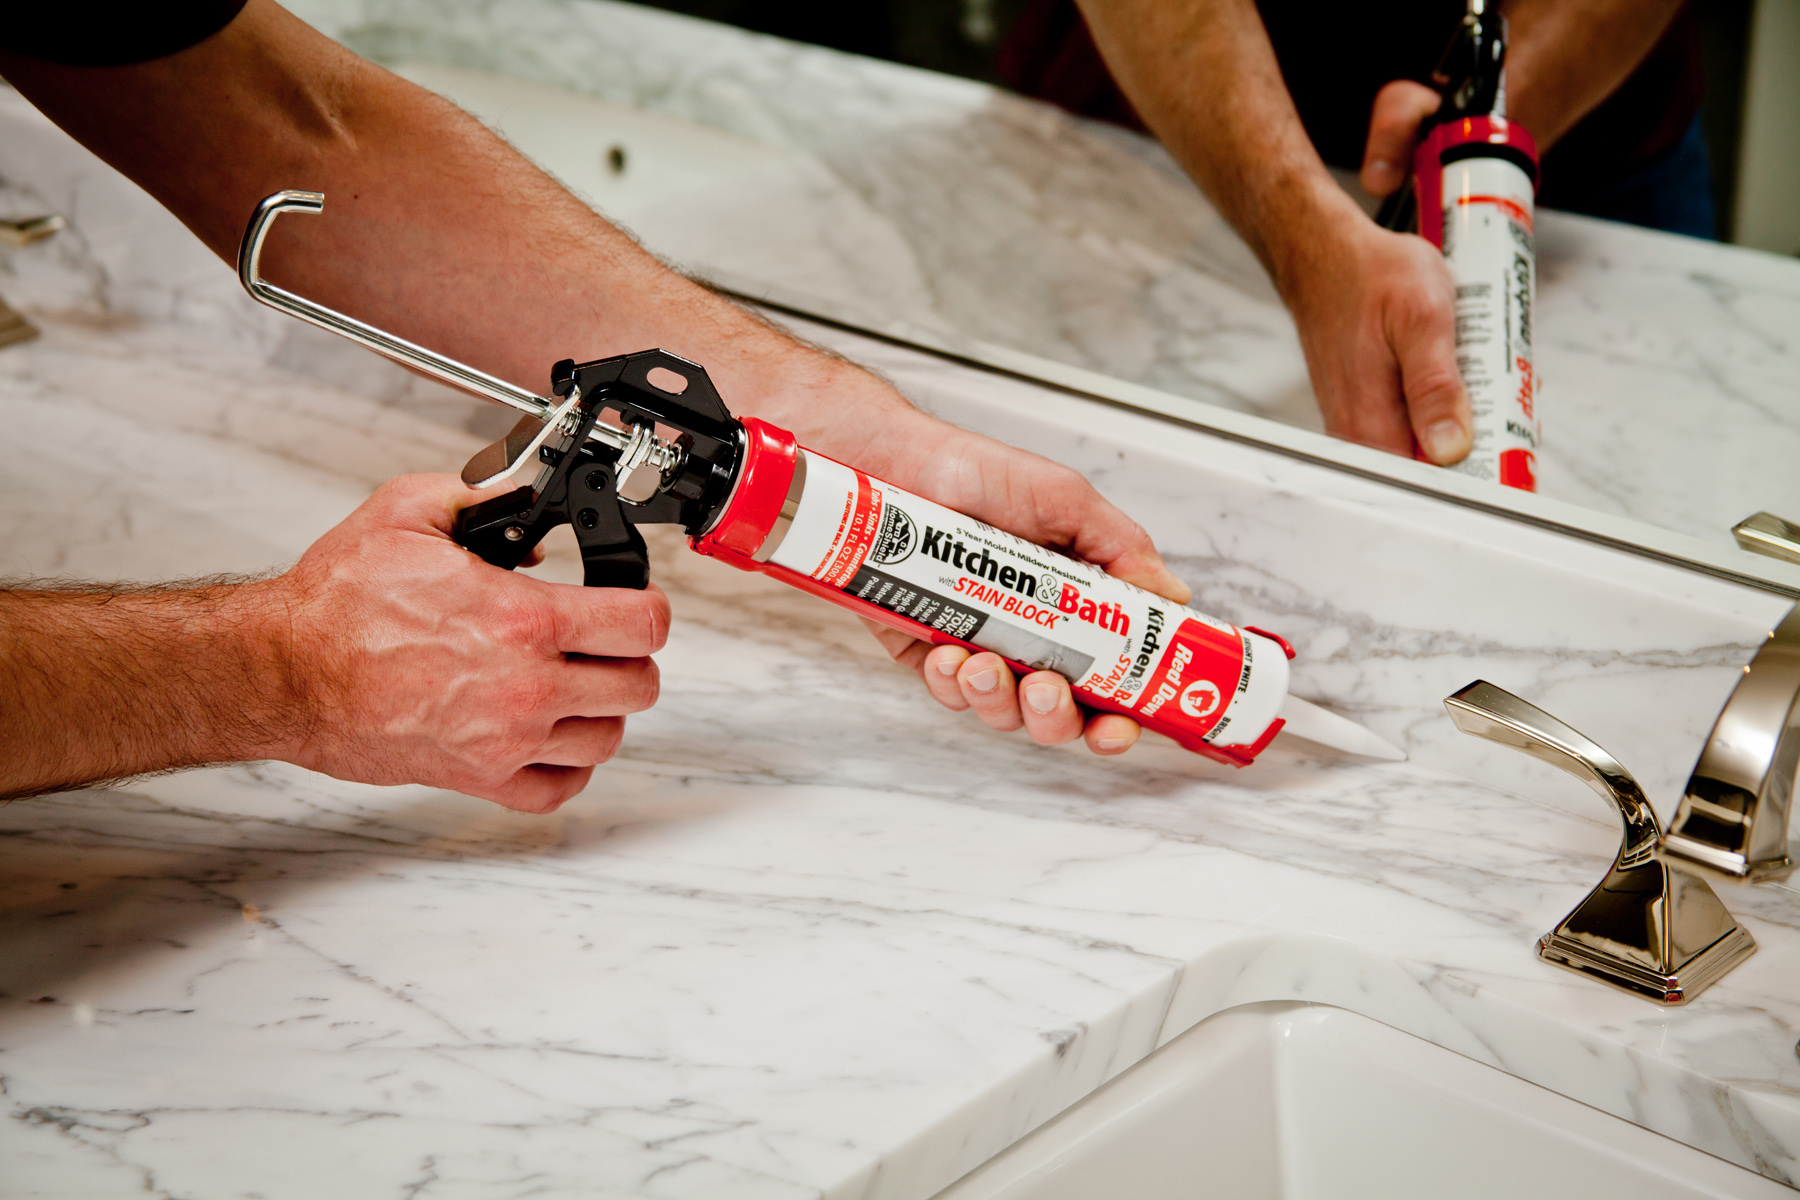 Red Devil’s Kitchen & Bath Stain Block™ Sealant resists mold, mildew and tough stains such as red wine.